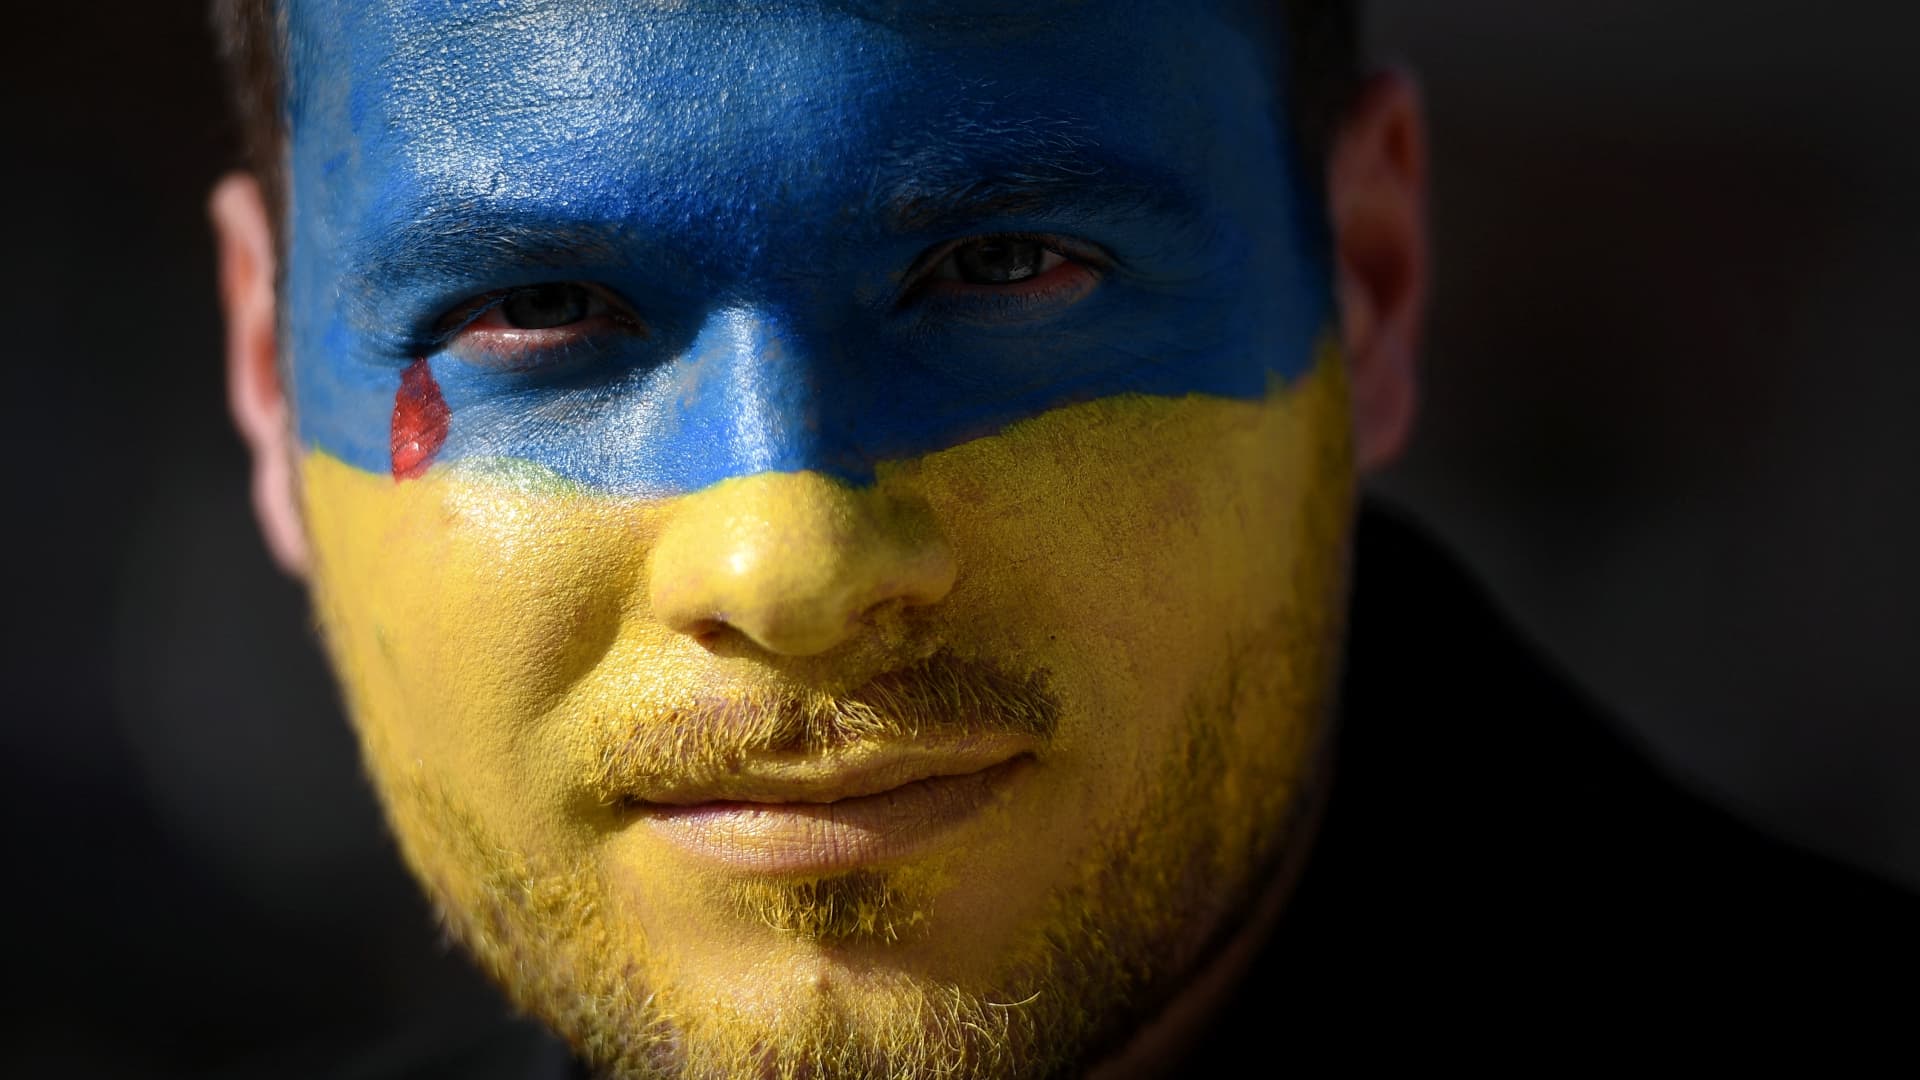 A protester with blue and yellow make-up on his face, colours of the Ukrainian flag, attends a demonstration at the Place du Capitole, in Toulouse, southern France, on February 27, 2022, against the Russian invasion in Ukraine.